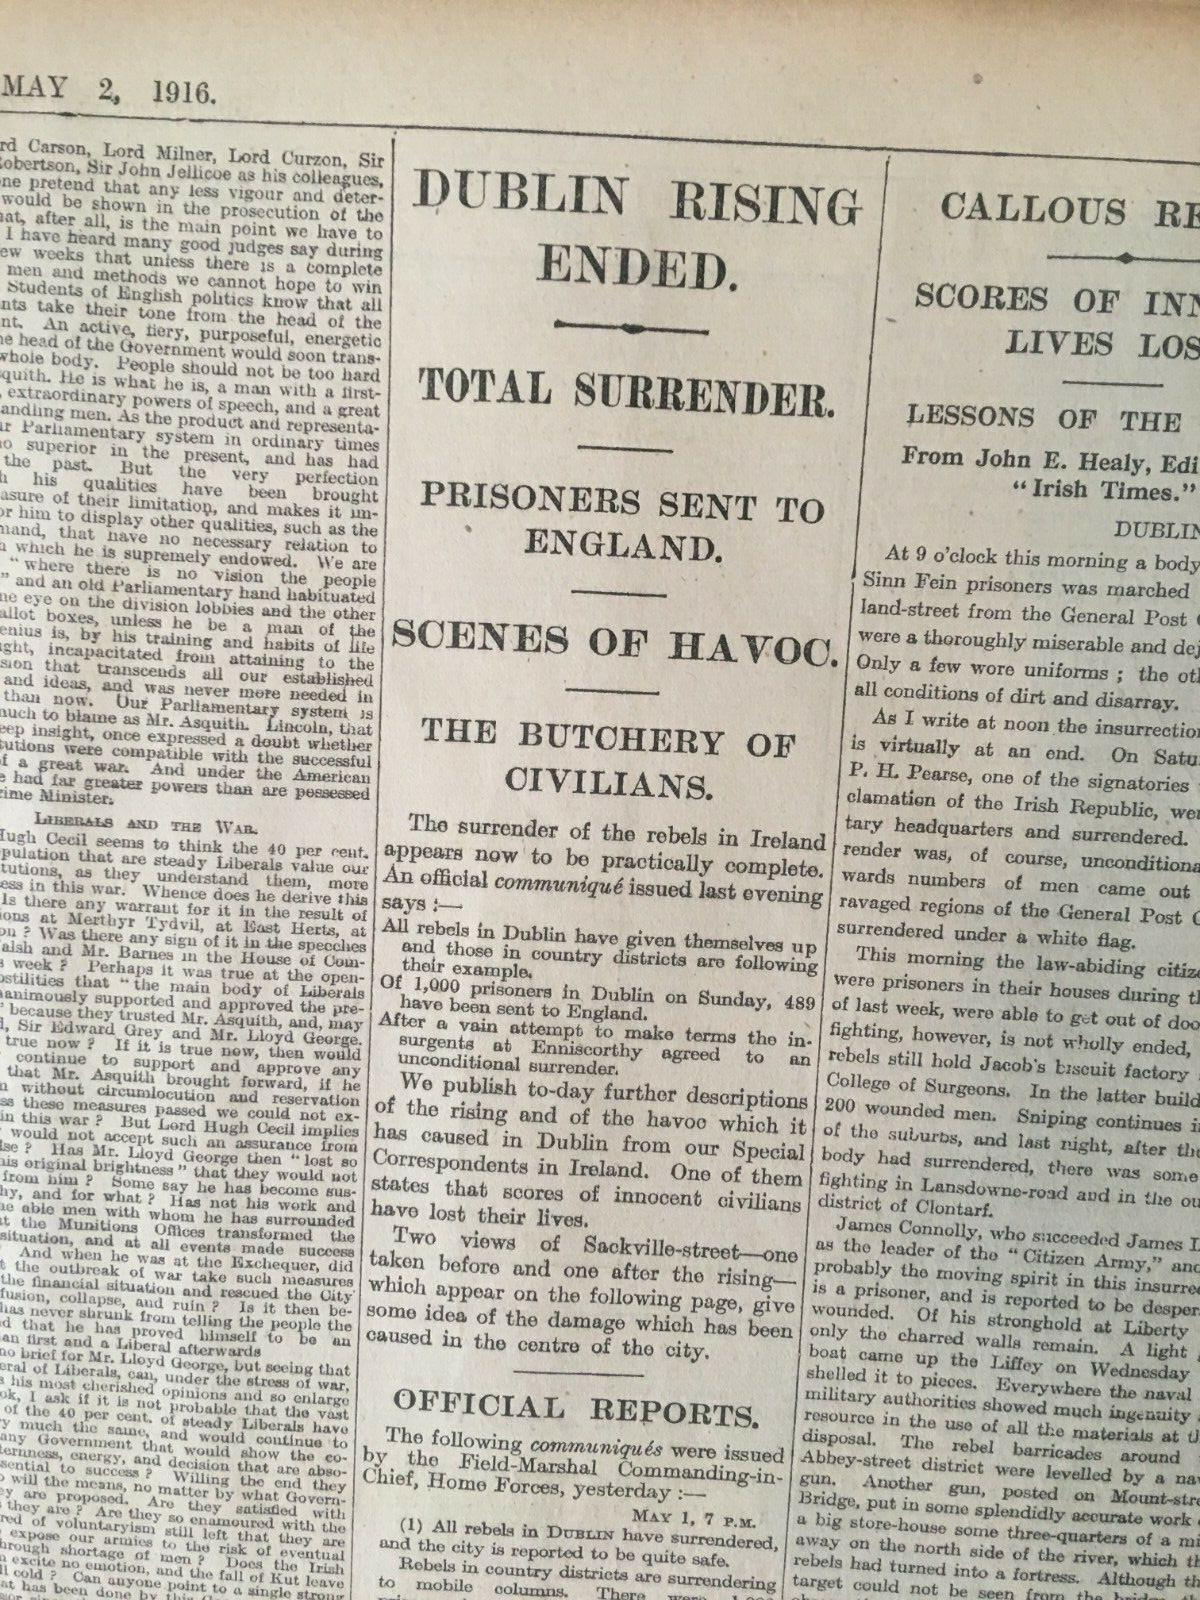 Easter Rising 1916 Original Complate Newspaper 2nd May Images & Reports - Image 5 of 12